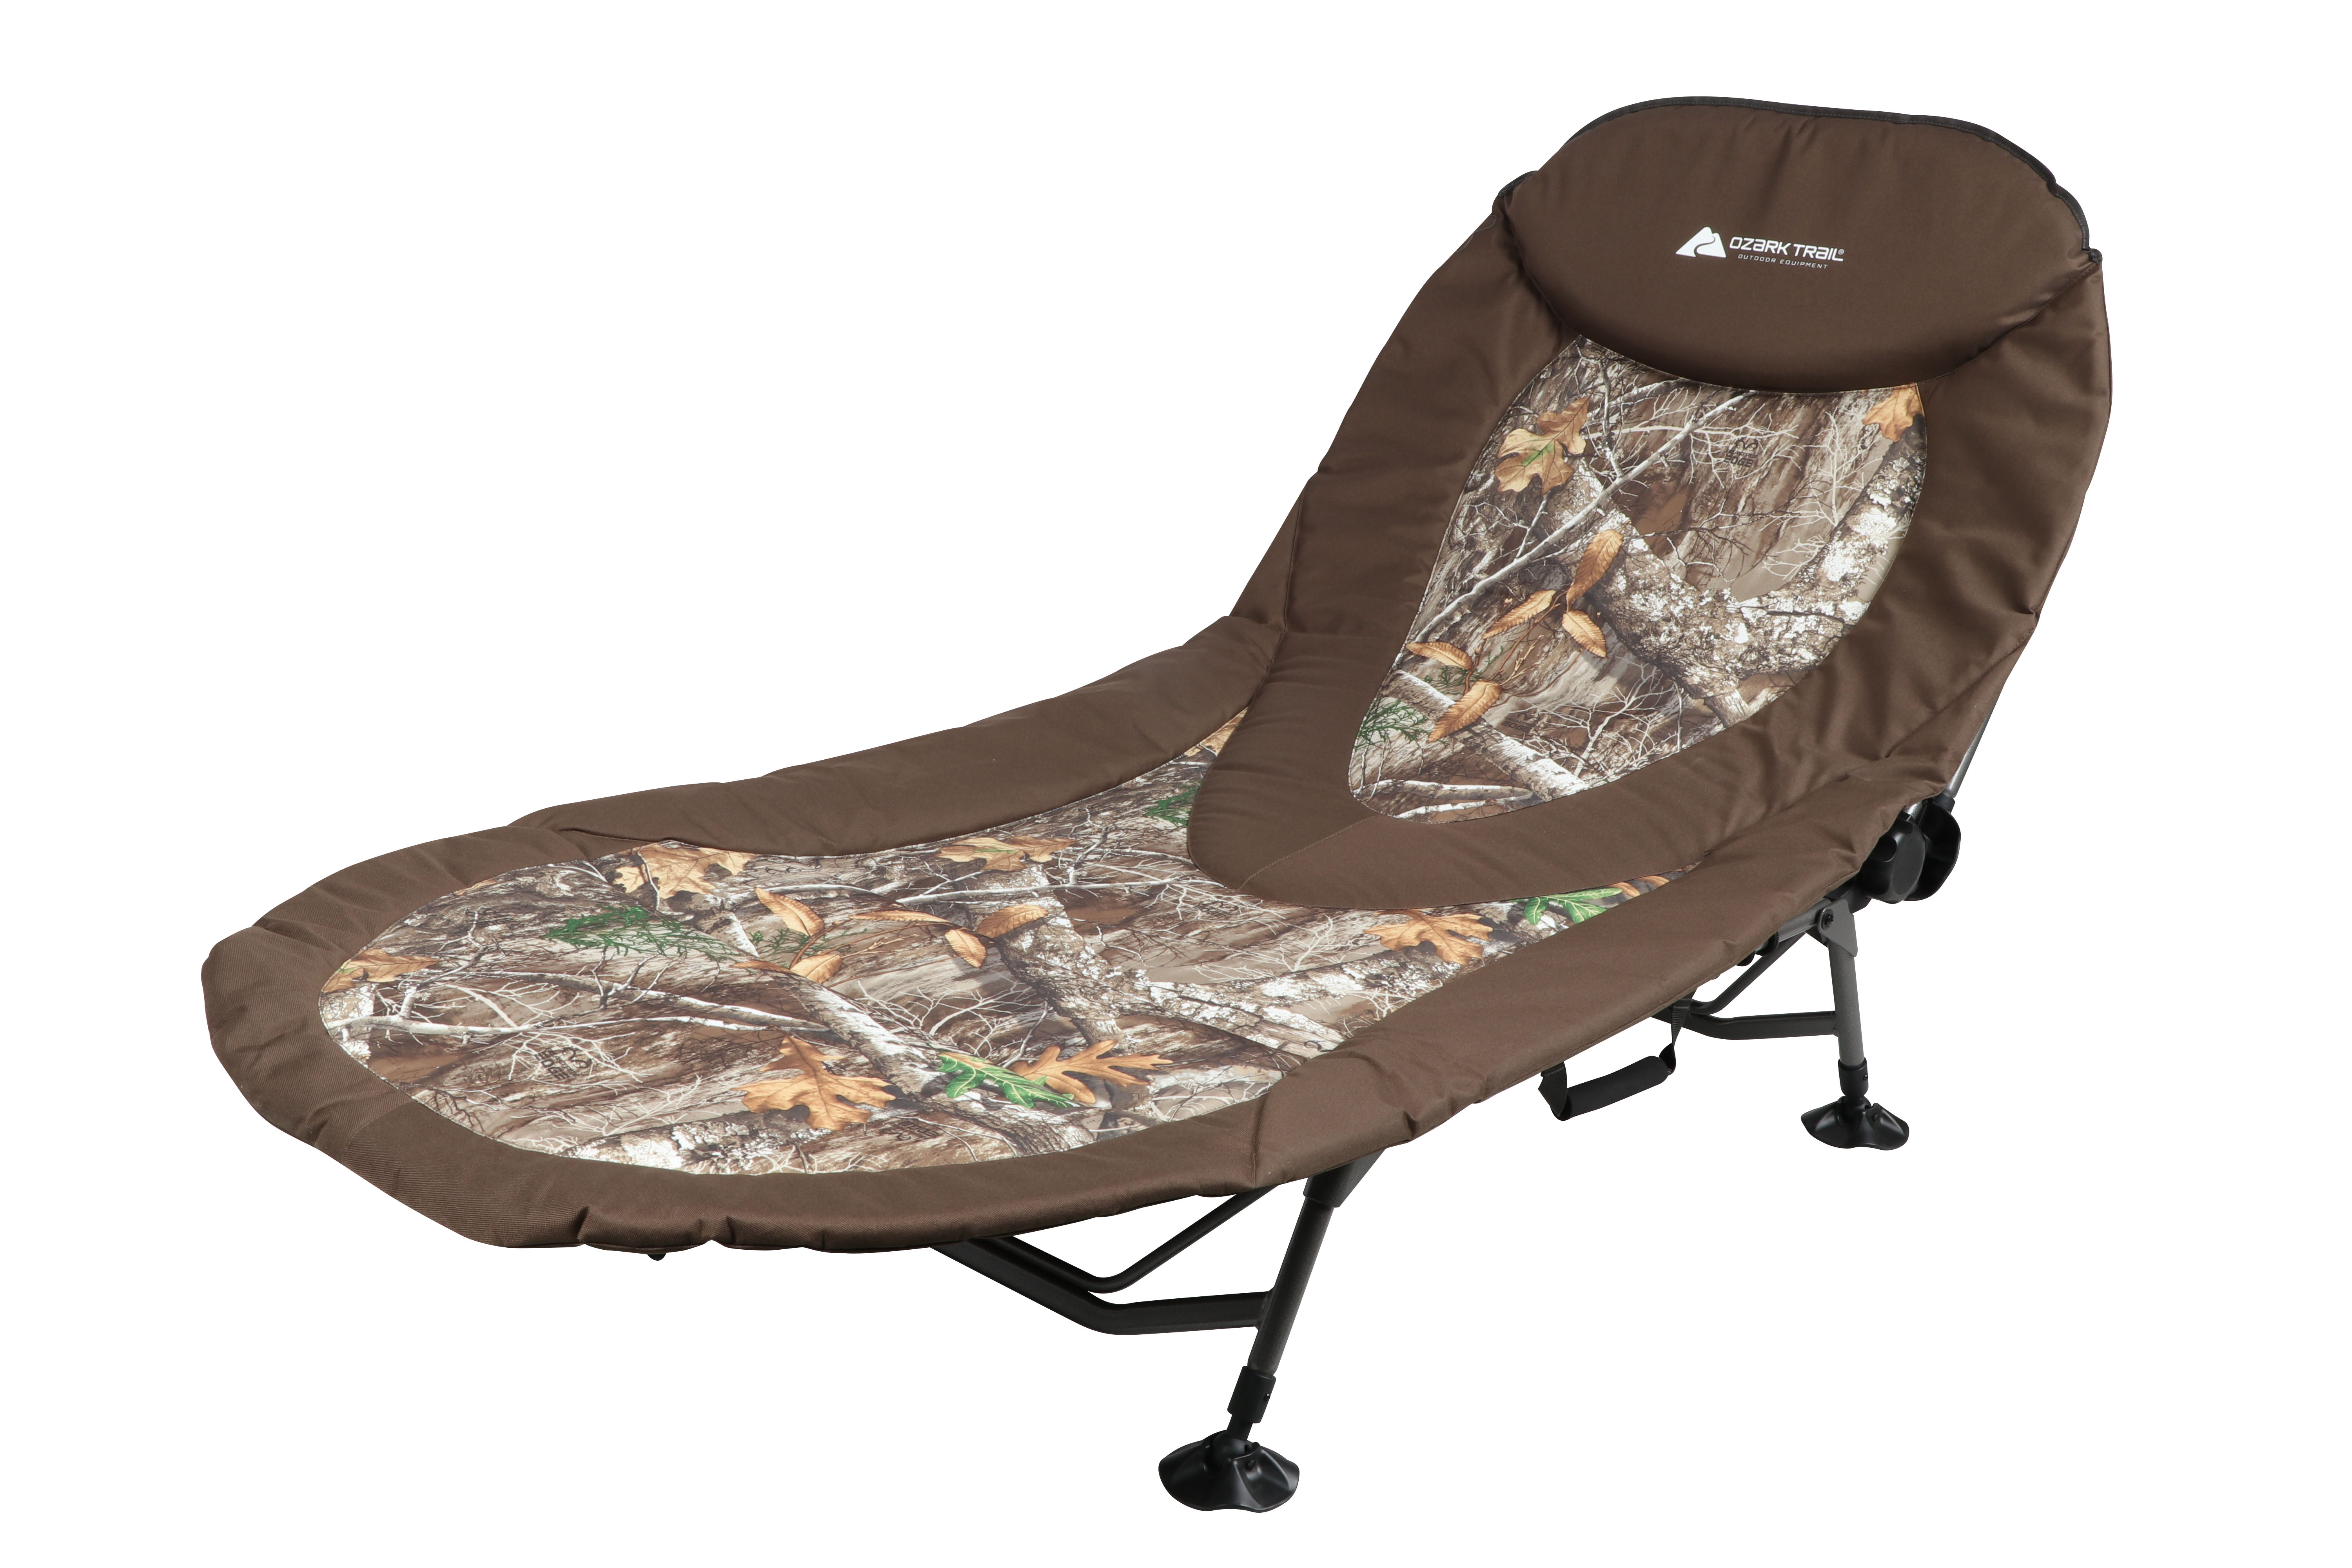 Ozark Trail North Fork Adjustable Camo Camping Cot, Green,  77.9"L x 31"W - image 1 of 15